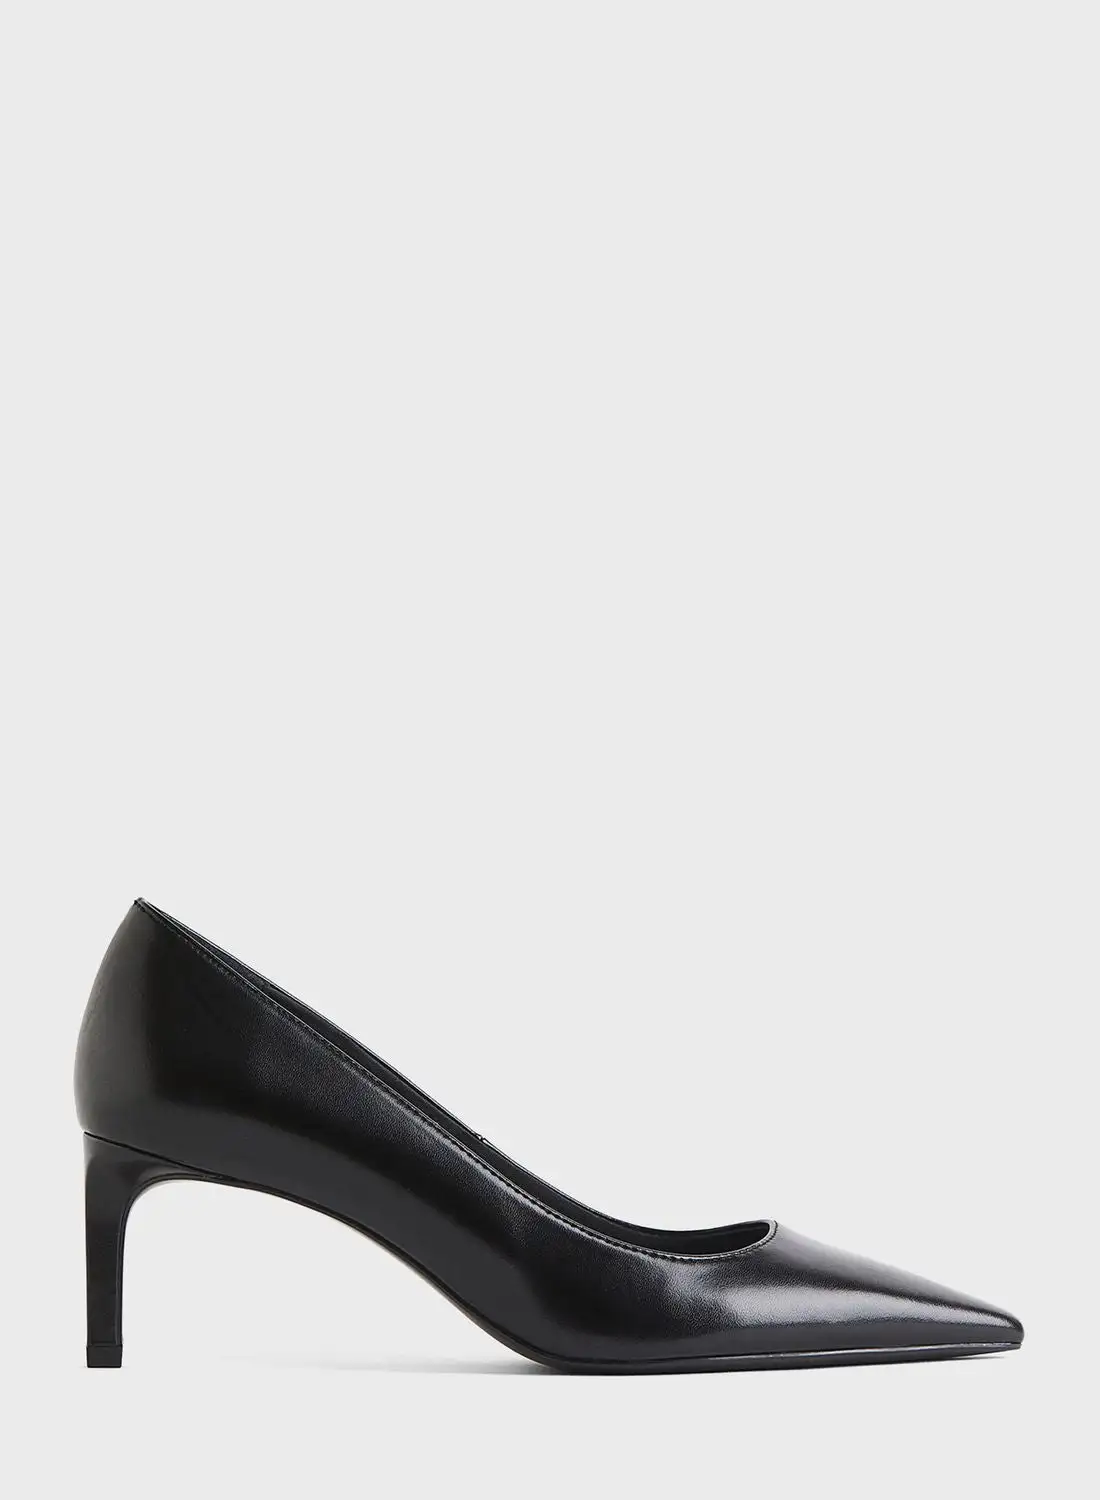 H&M Pointed Toe Pumps